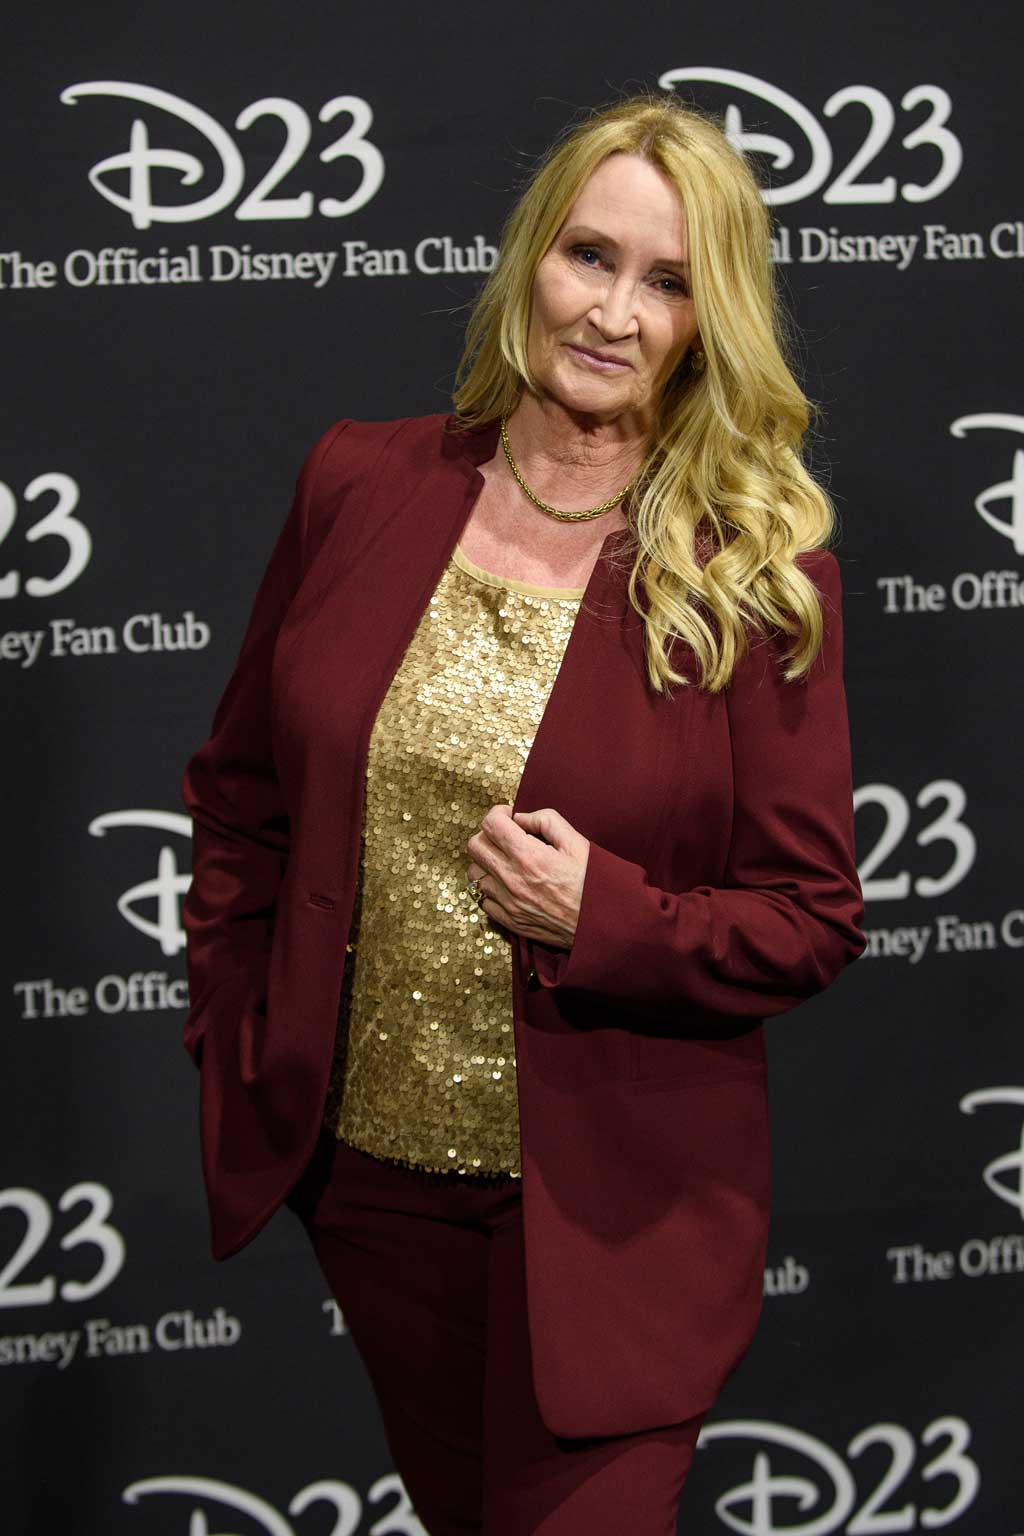 Disney Legend and actress Karen Dotrice (Jane Banks in Mary Poppins) at D23’s 10-Year FAN-niversary Celebration at the Walt Disney Studios, March 10, 2019.